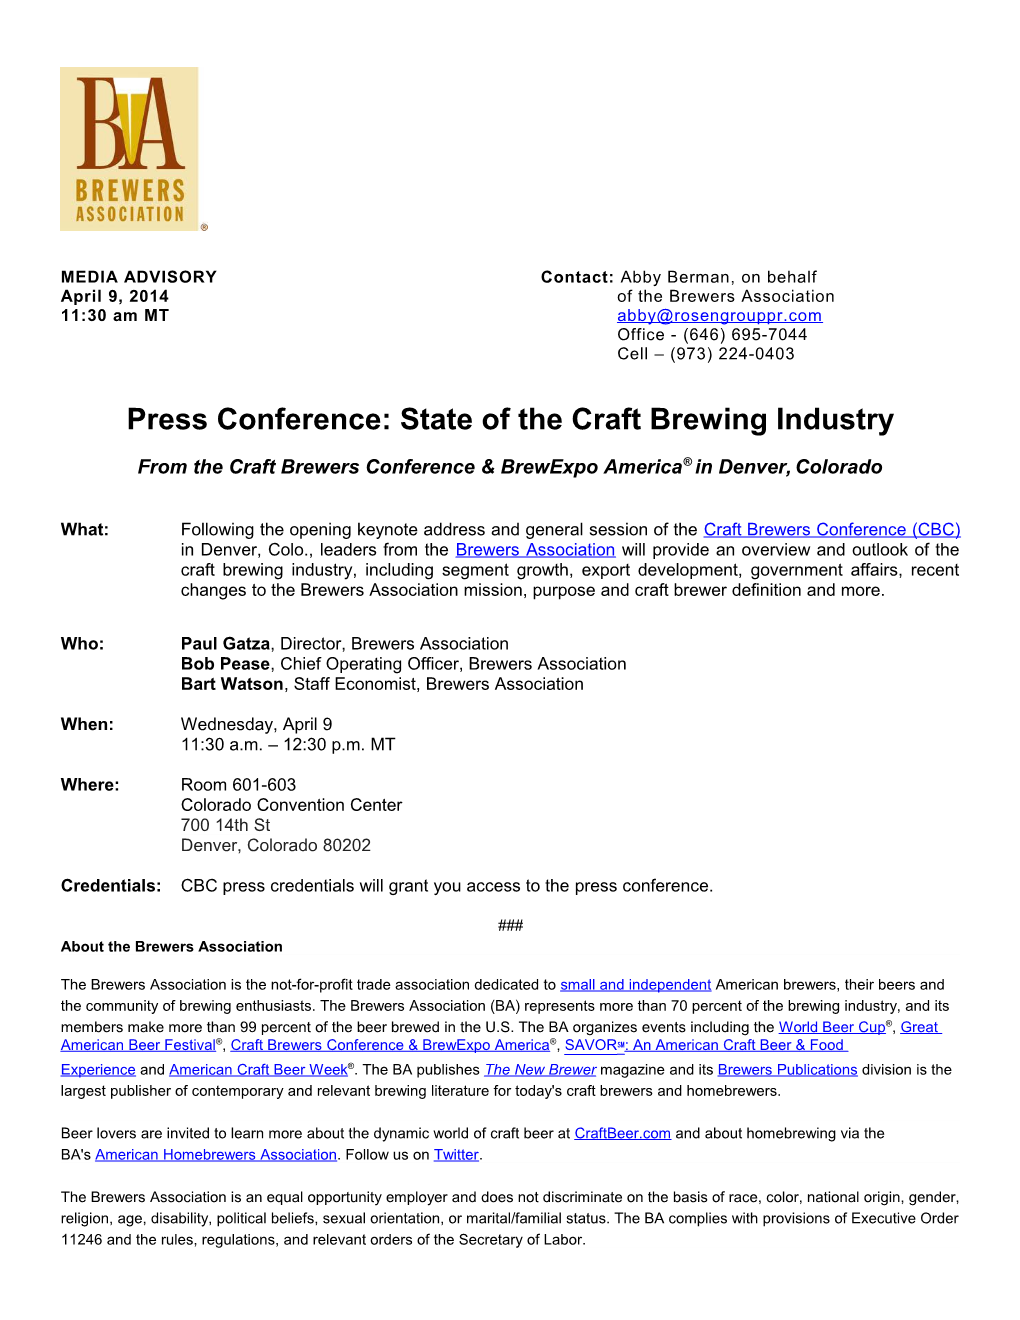 Press Conference: State of the Craft Brewing Industry